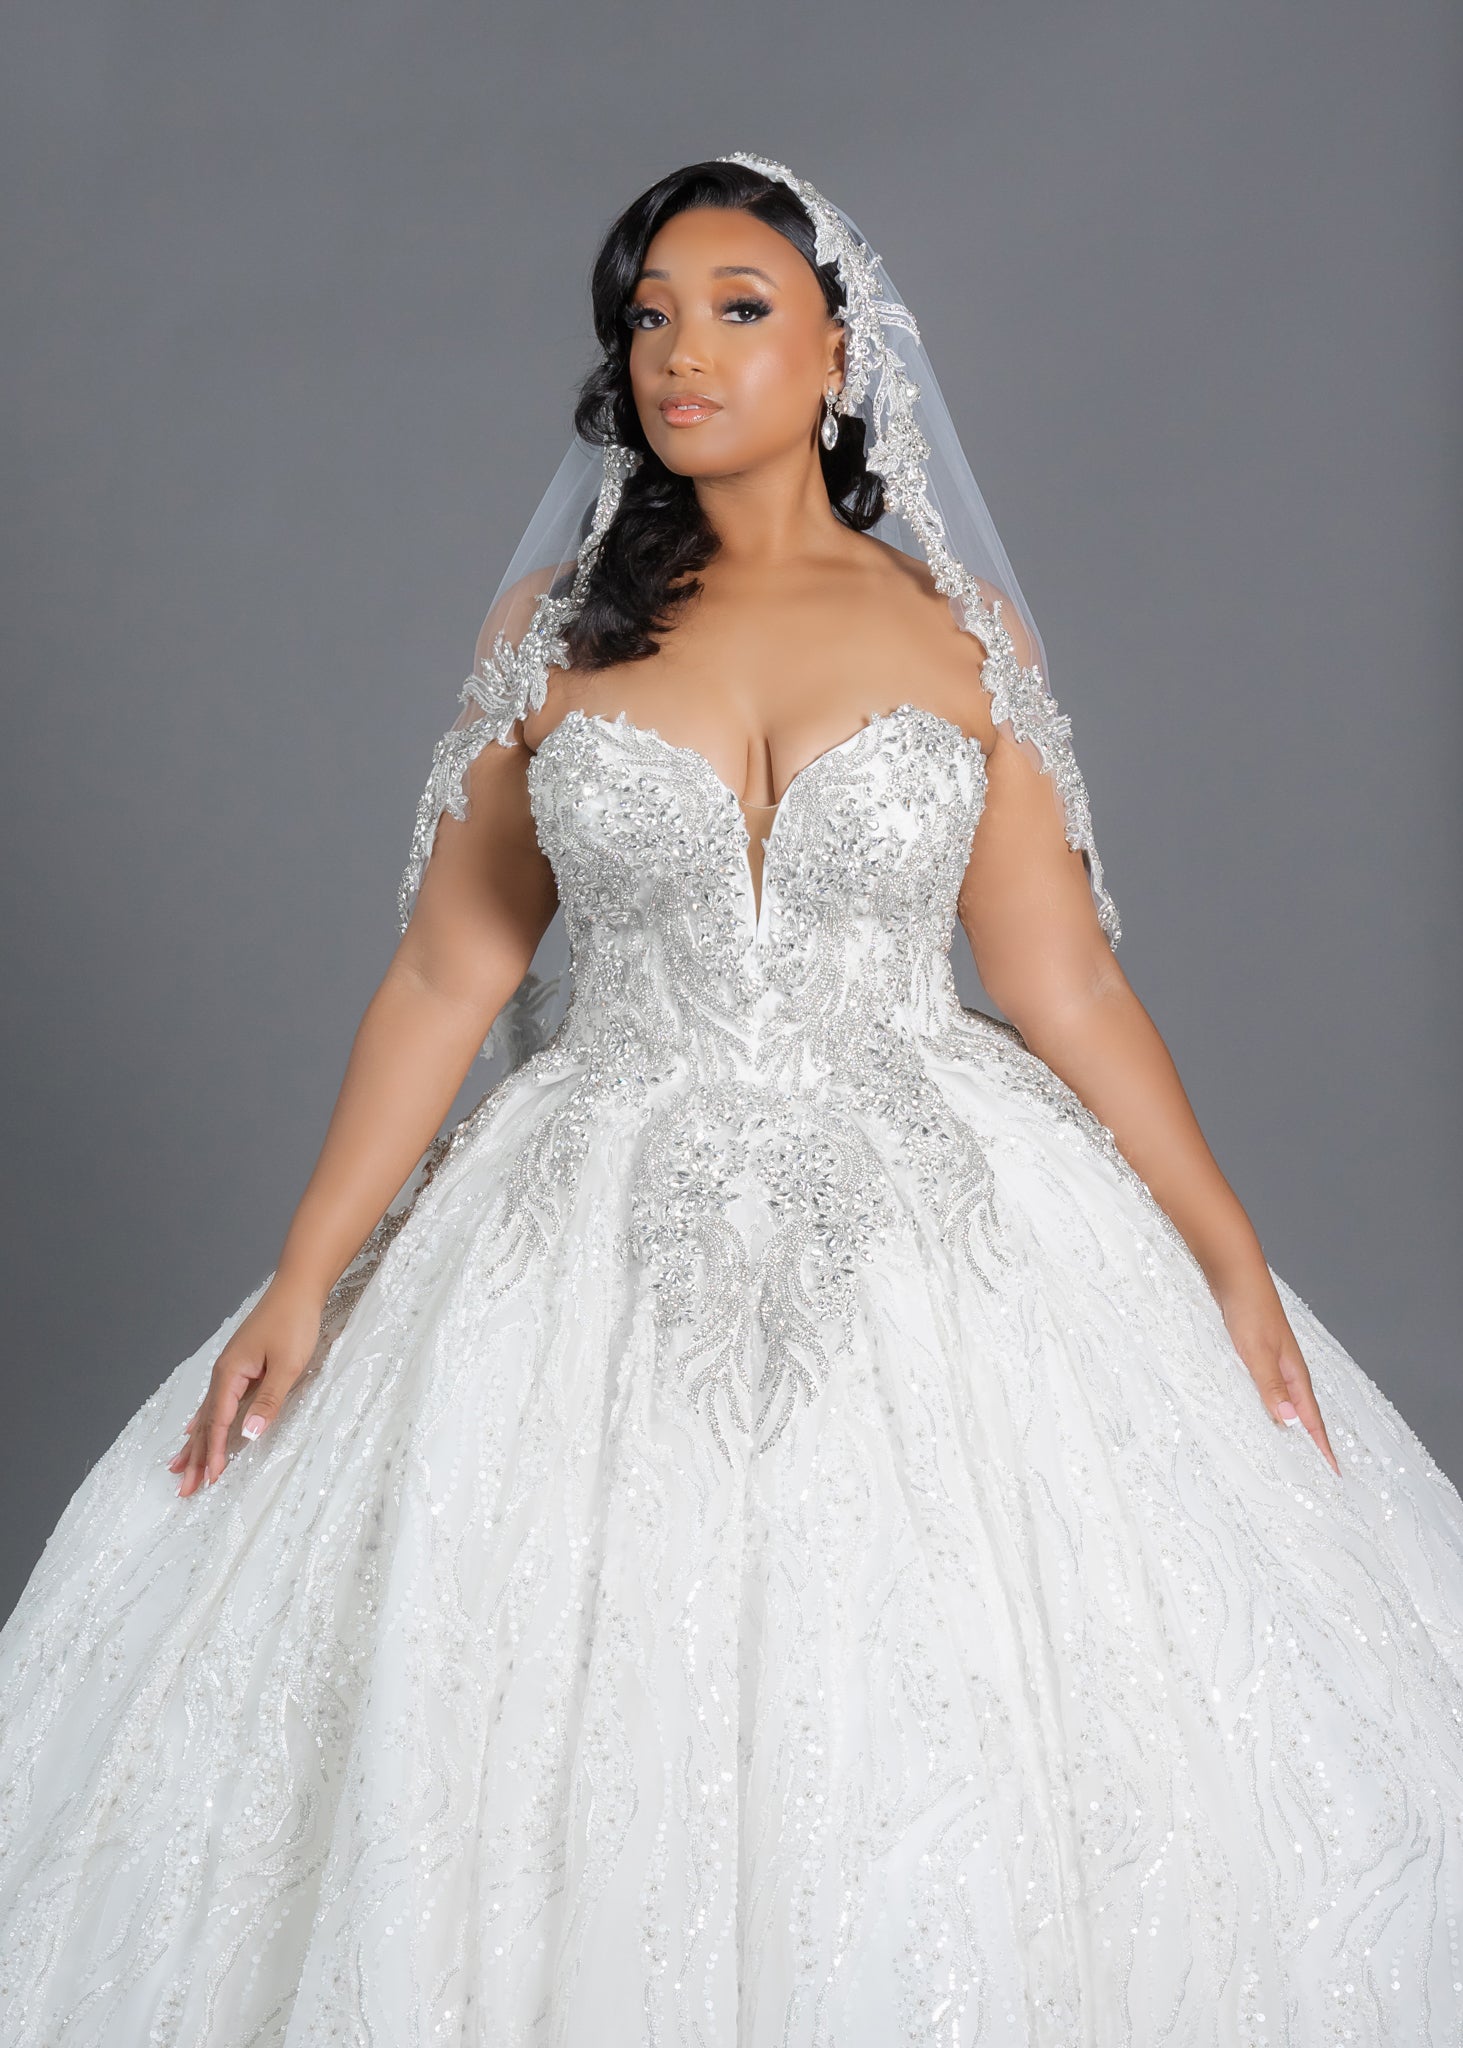 Beautiful finger-tip bridal veil with bling border designed for brides seeking a dramatic addition to their wedding look. Featuring sparkling crystal appliques this veil provides bling along the entire edge. Available in white, diamond white, and ivory with optional blusher. Shown on plus size bride wearing beaded ballgown.